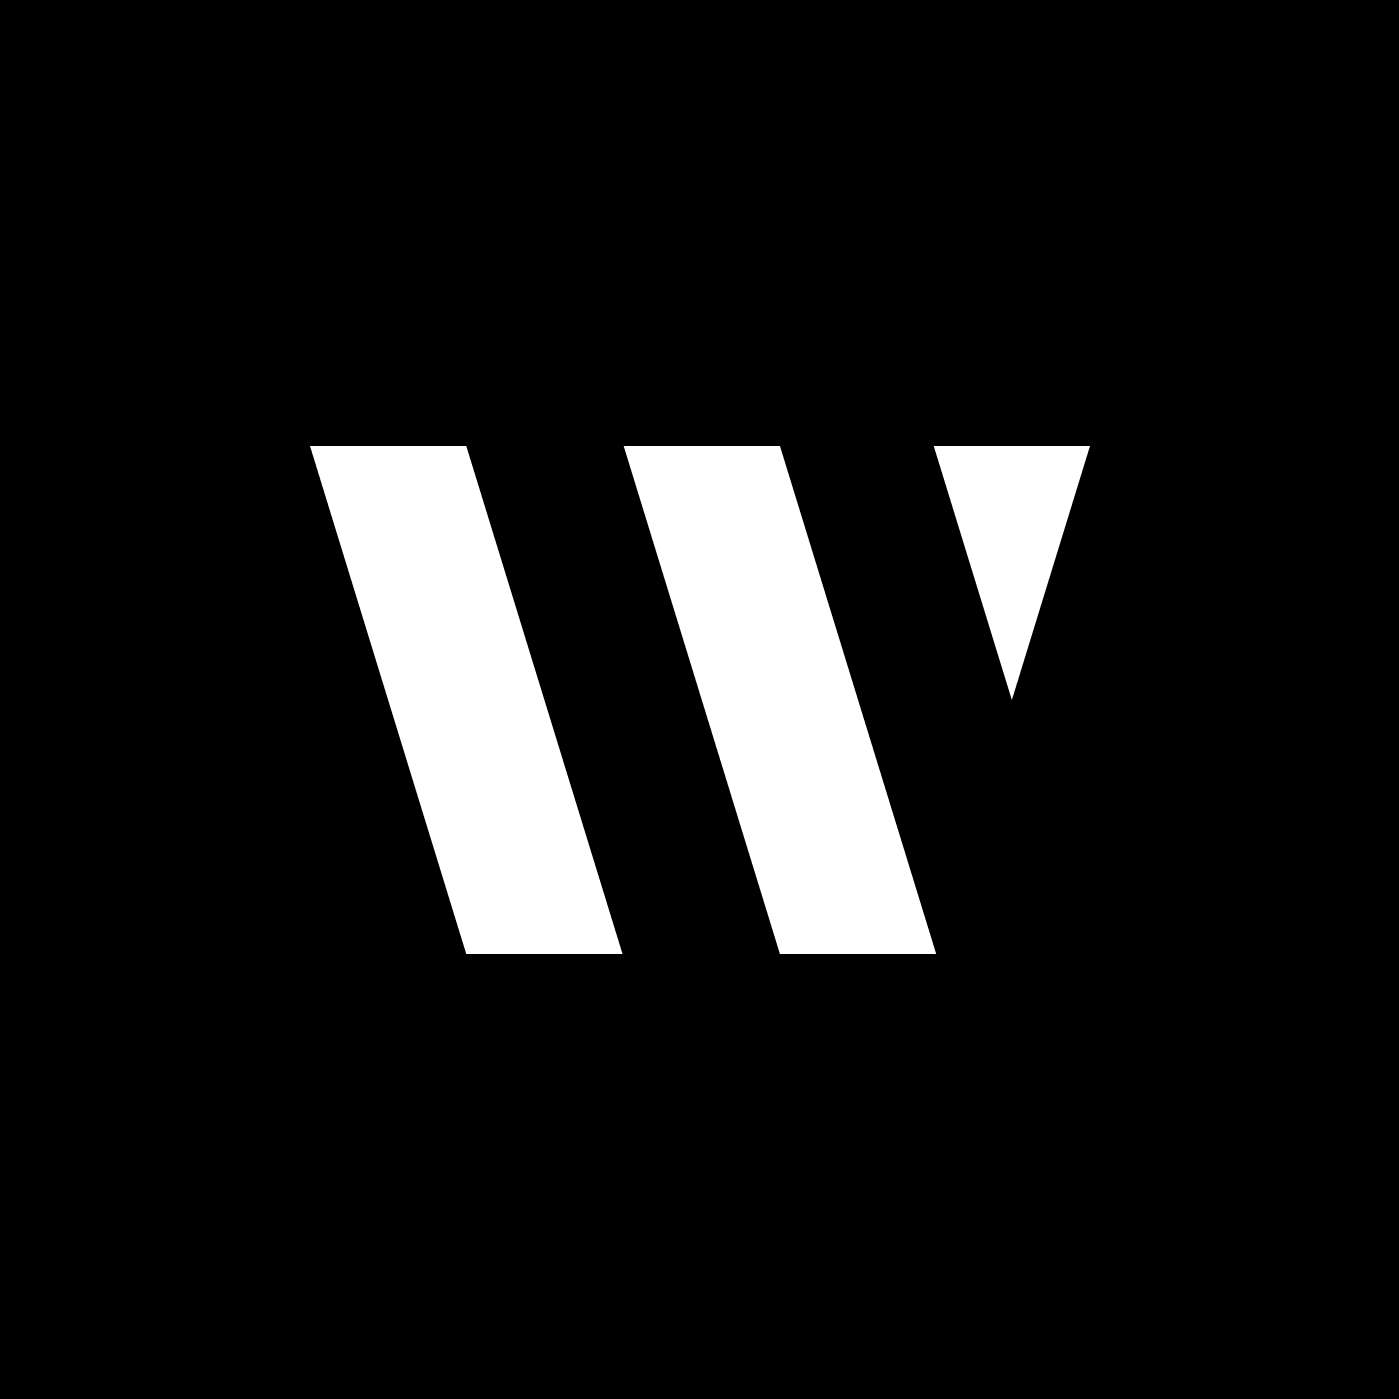 W for Woman - Crunchbase Company Profile & Funding